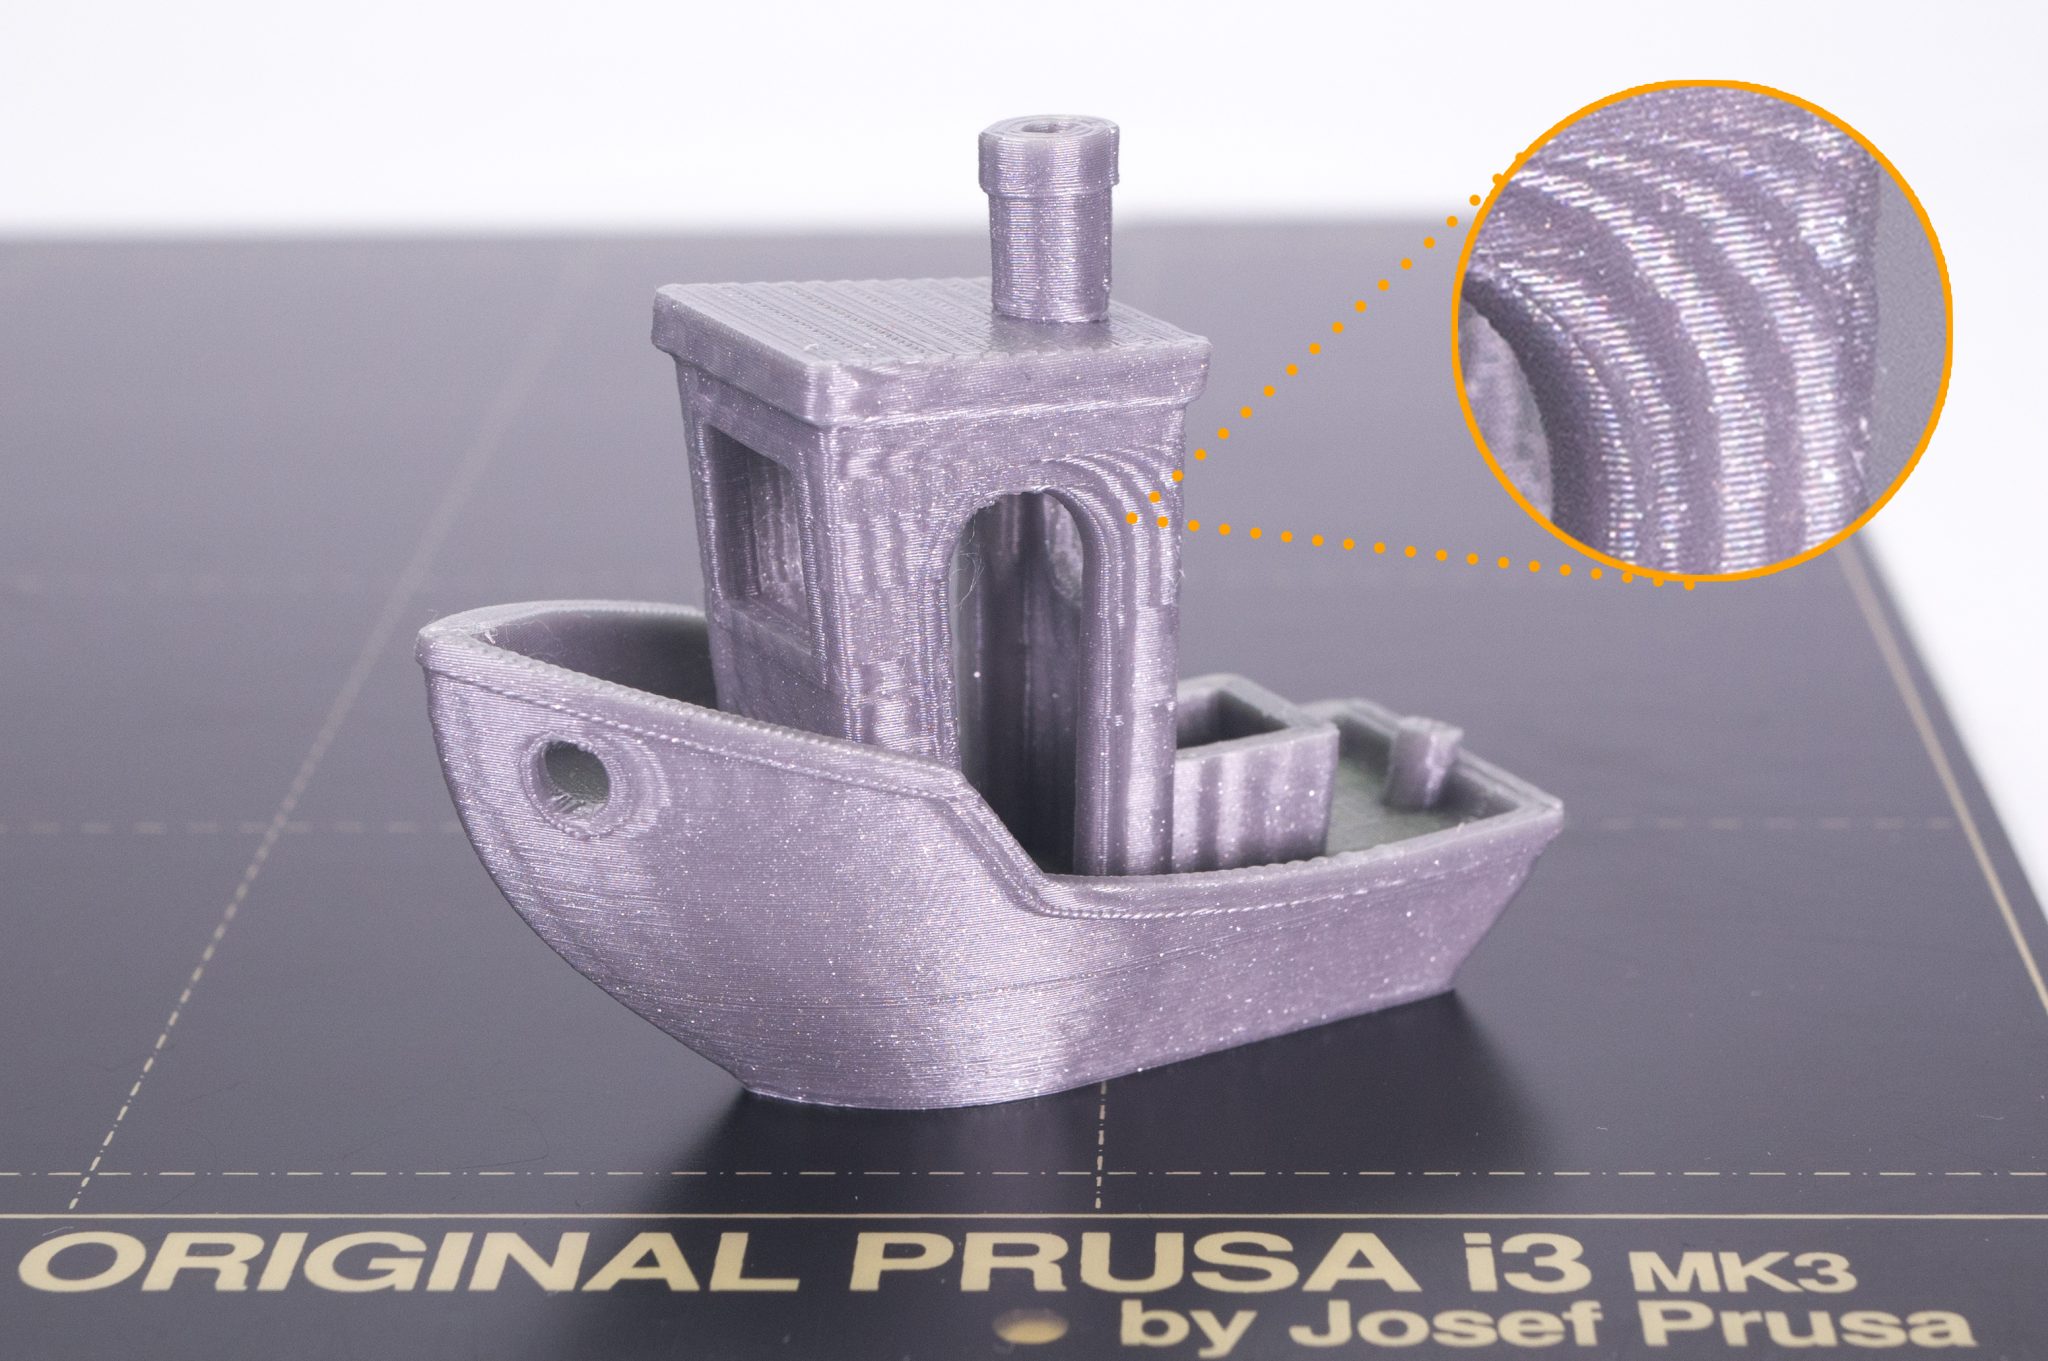 panel ejendom Kanon Does your newly assembled Original Prusa i3 MK3 print the best it can? -  Original Prusa 3D Printers